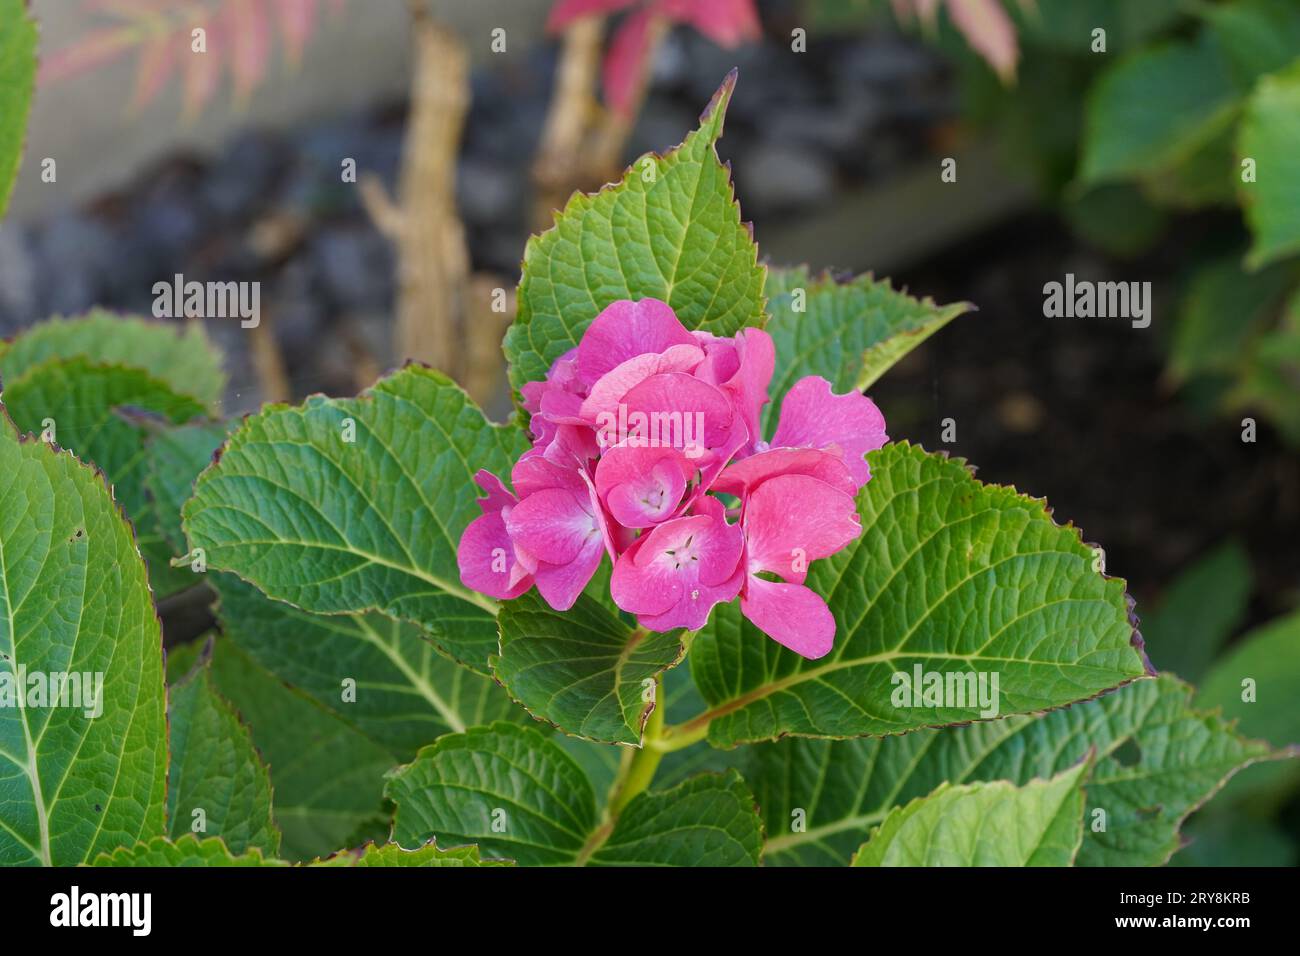 Hydrangea or commonly called Hortensia with dark pink flowers. A detail of the inflorescence with green leaves around. Stock Photo